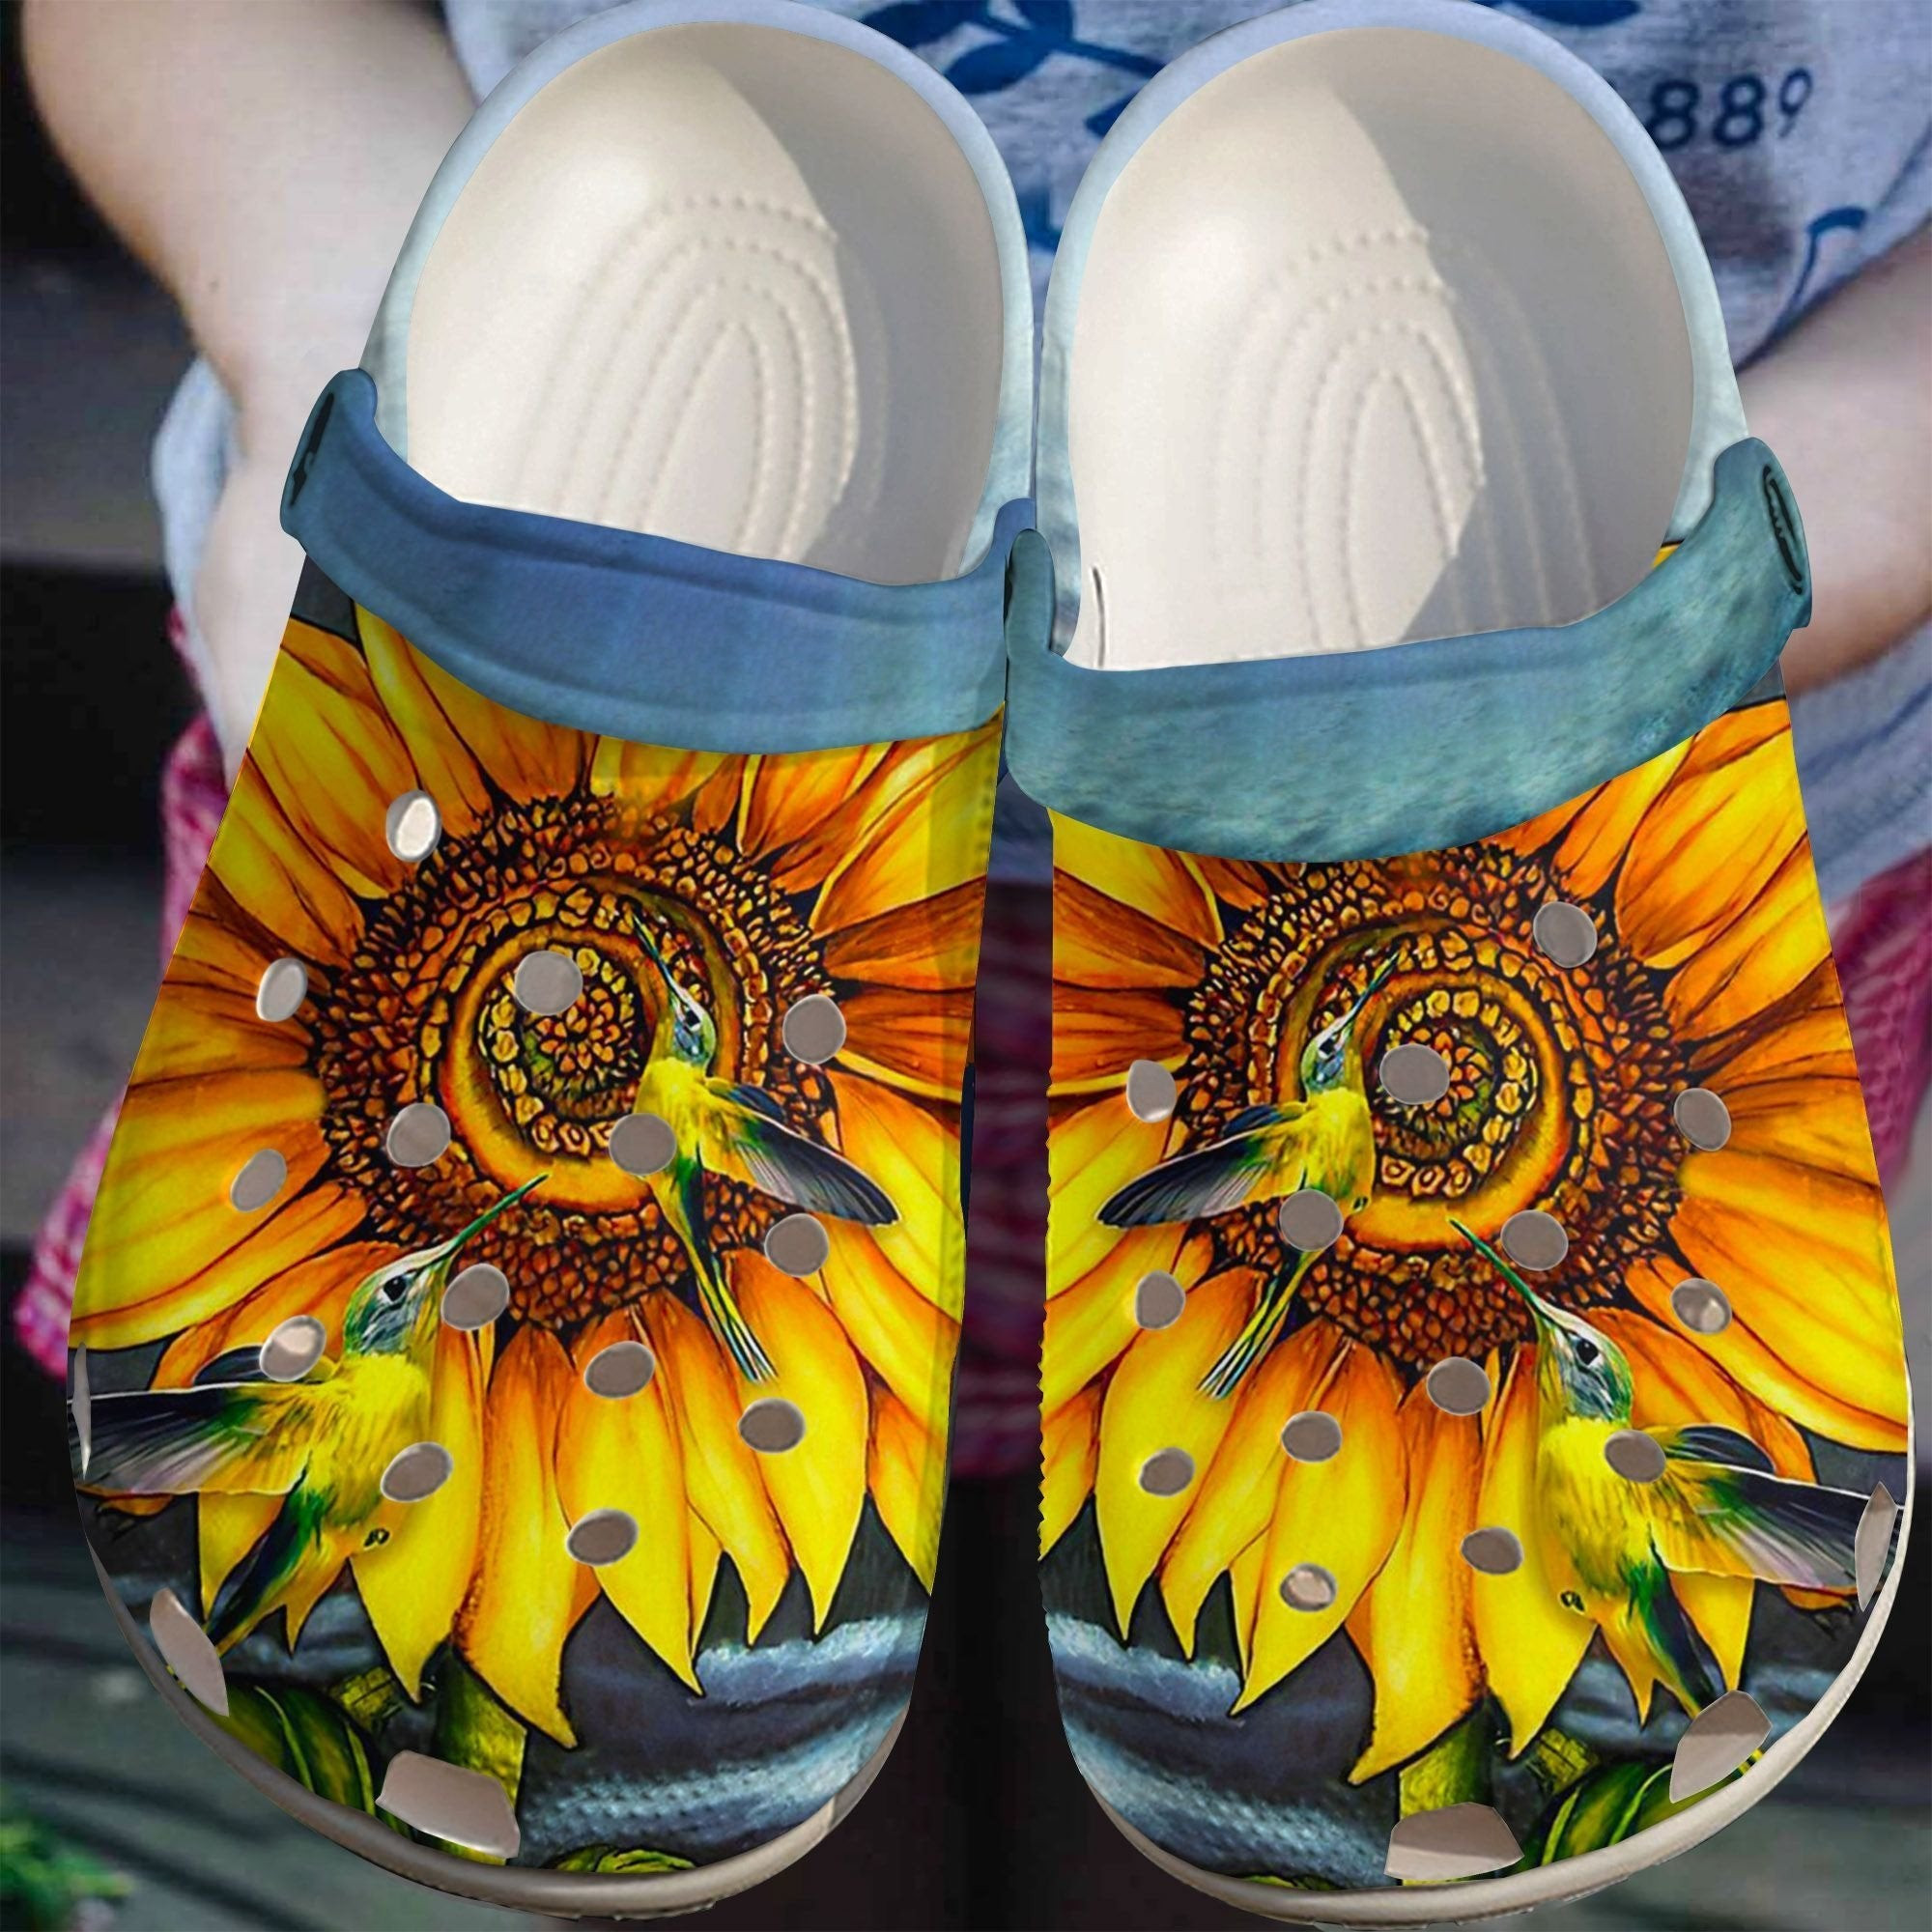 Humming Bird Sunflower Shoes - To The Sun Crocs Clogs Birthday Gift For Wife